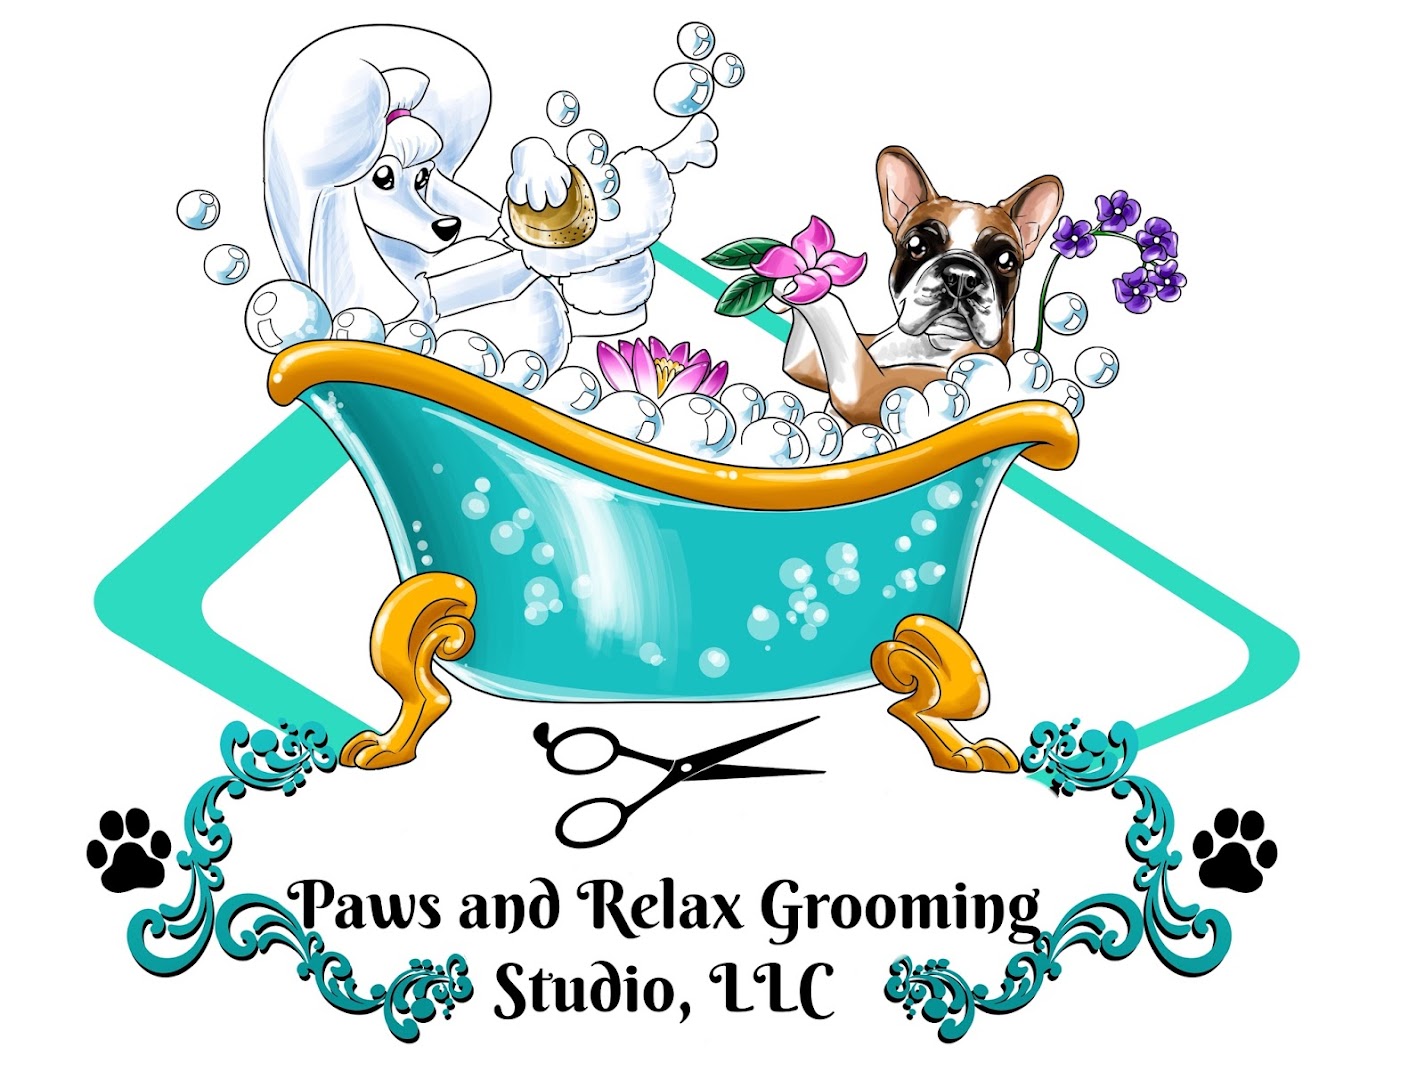 Paws and Relax Grooming Studio